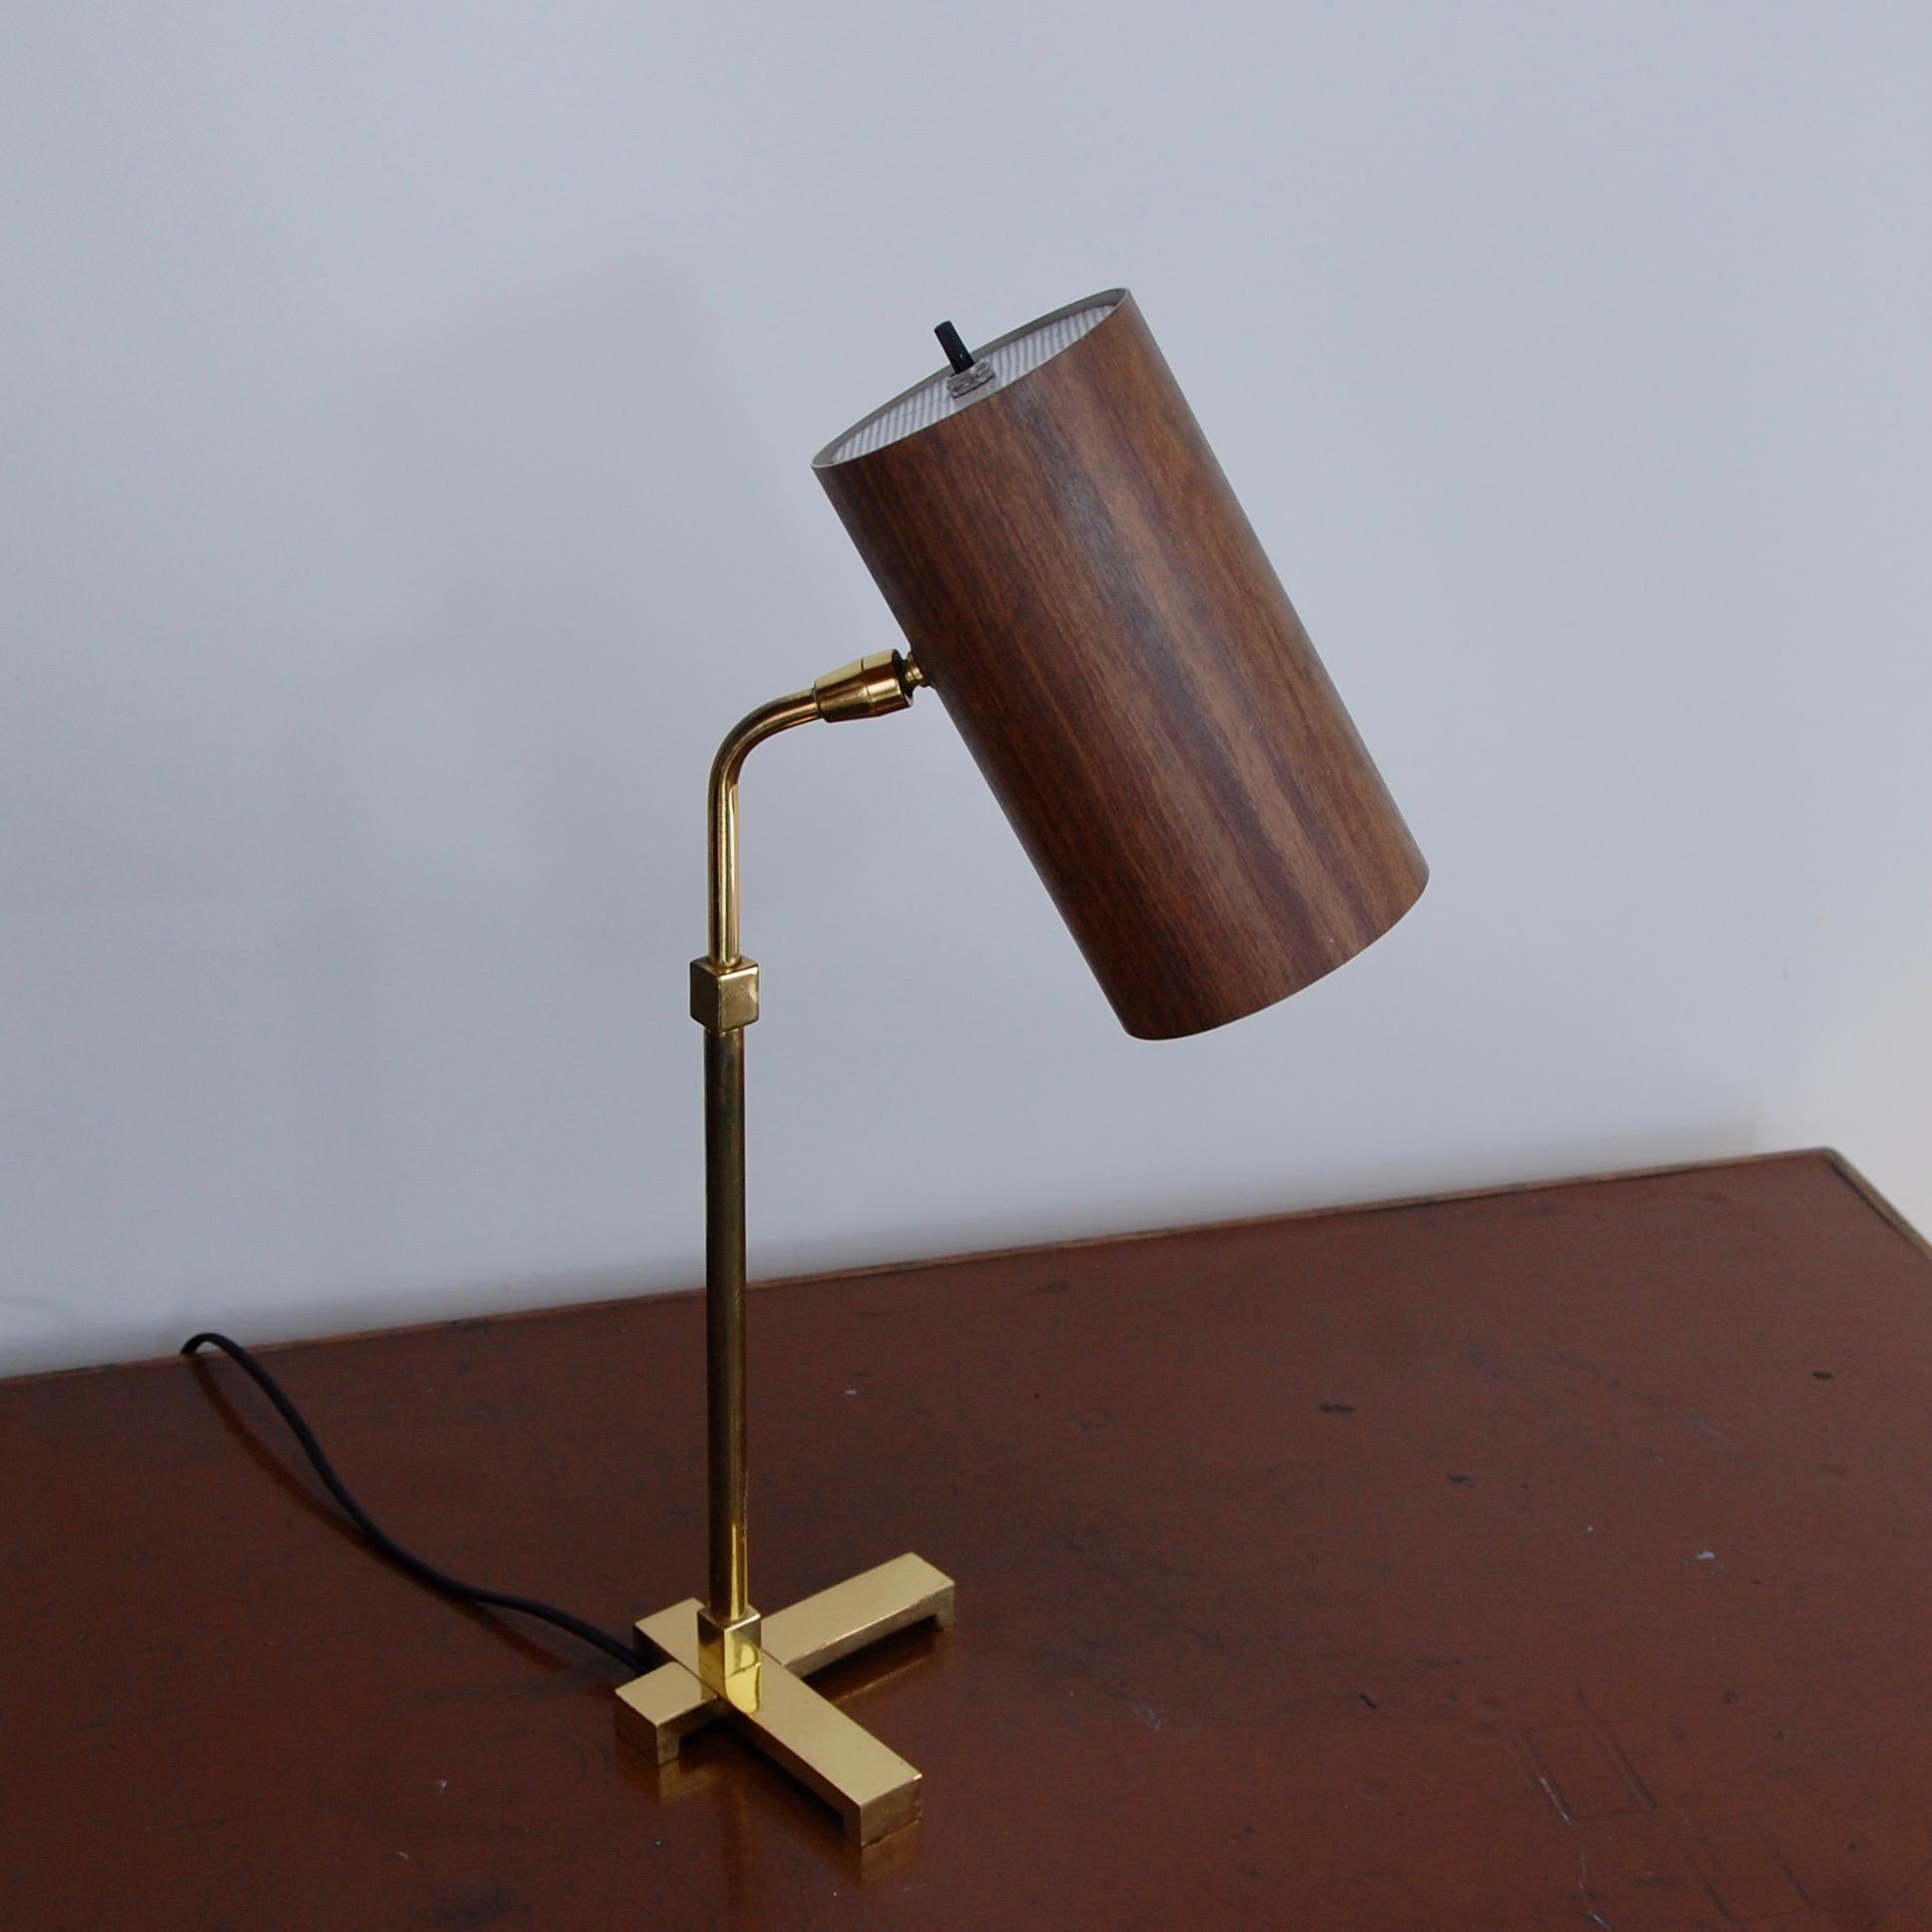 American 1950s of the period brass and aluminum table lamp. Rewired with single E26 medium based socket. Currently wired for use in the US. Light bulb included in order.
Measurements:
Height 18”
Shade 4” x 7.5”
Base 5.5”.
               